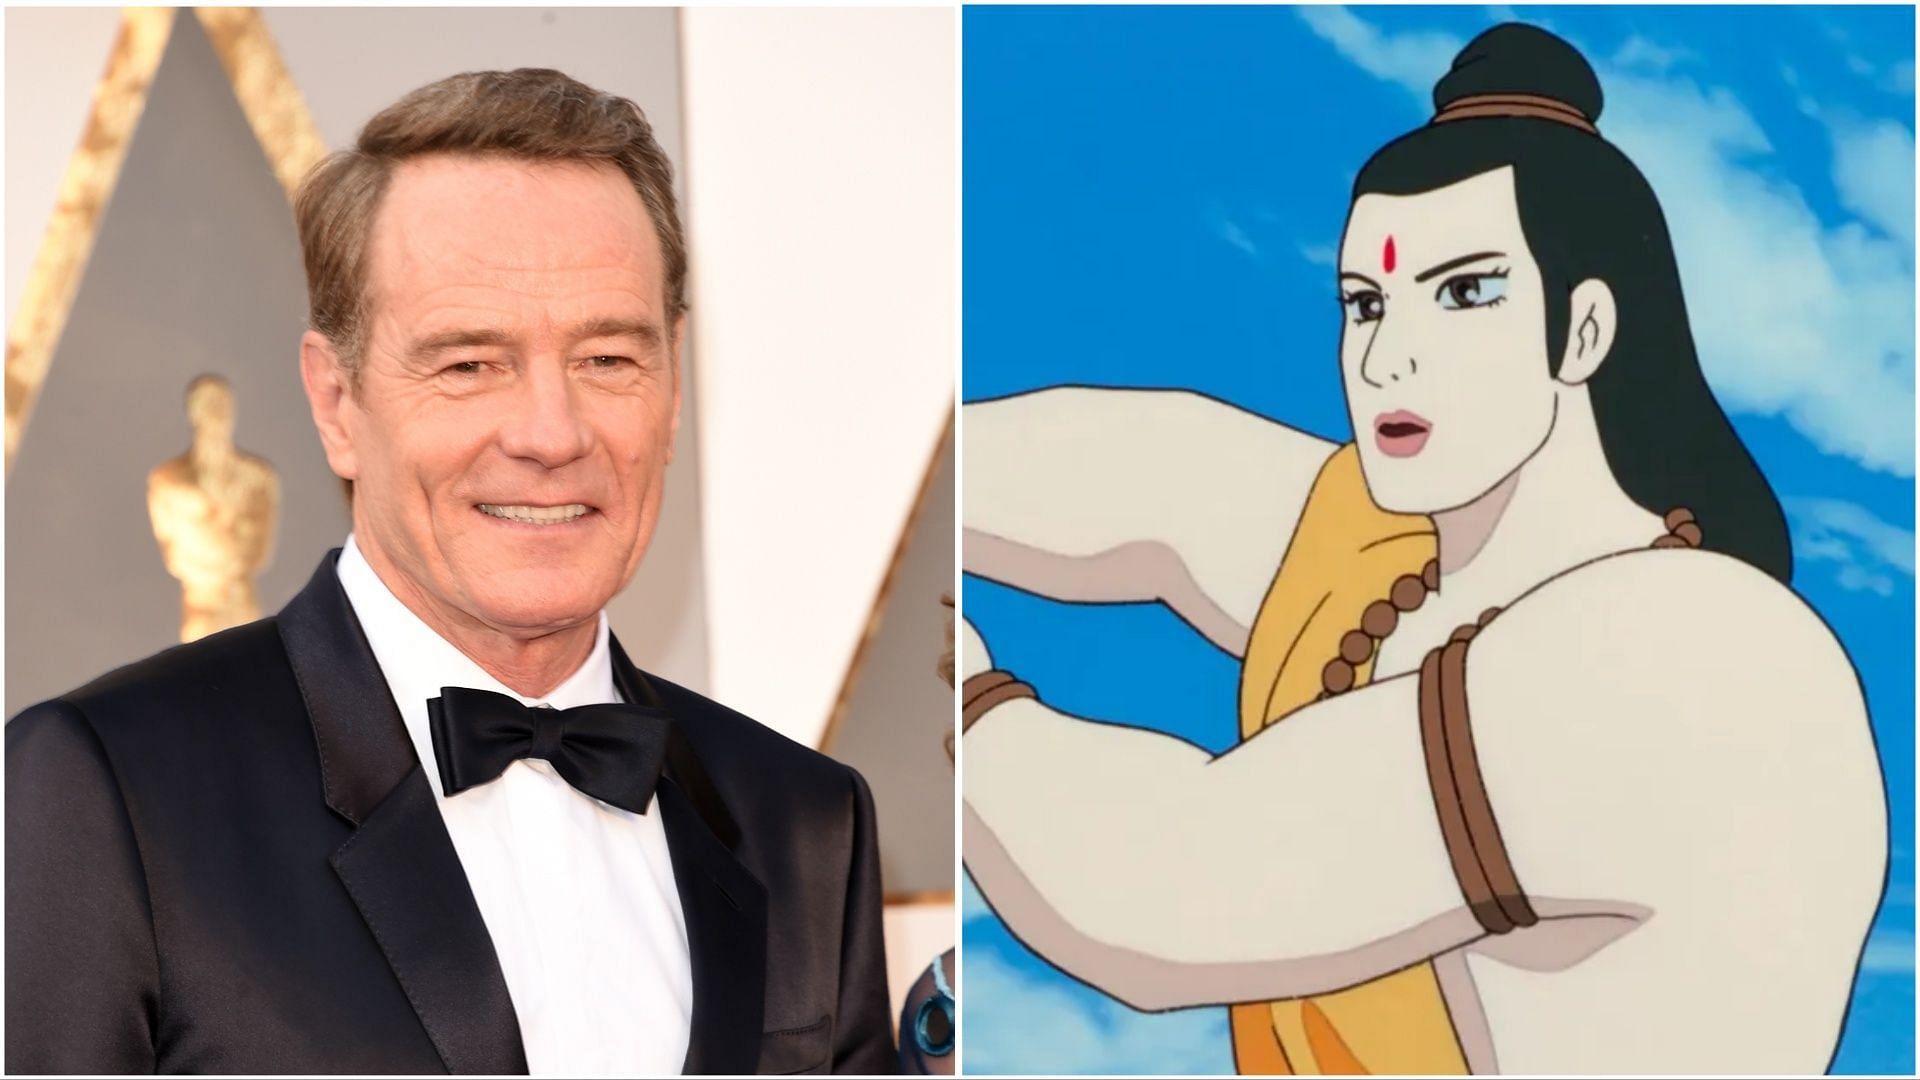 Taking a look at some of the anime characters that Bryan Cranston voiced (Image via IMDb and Nippon Ramayana Film Co. Ltd.)